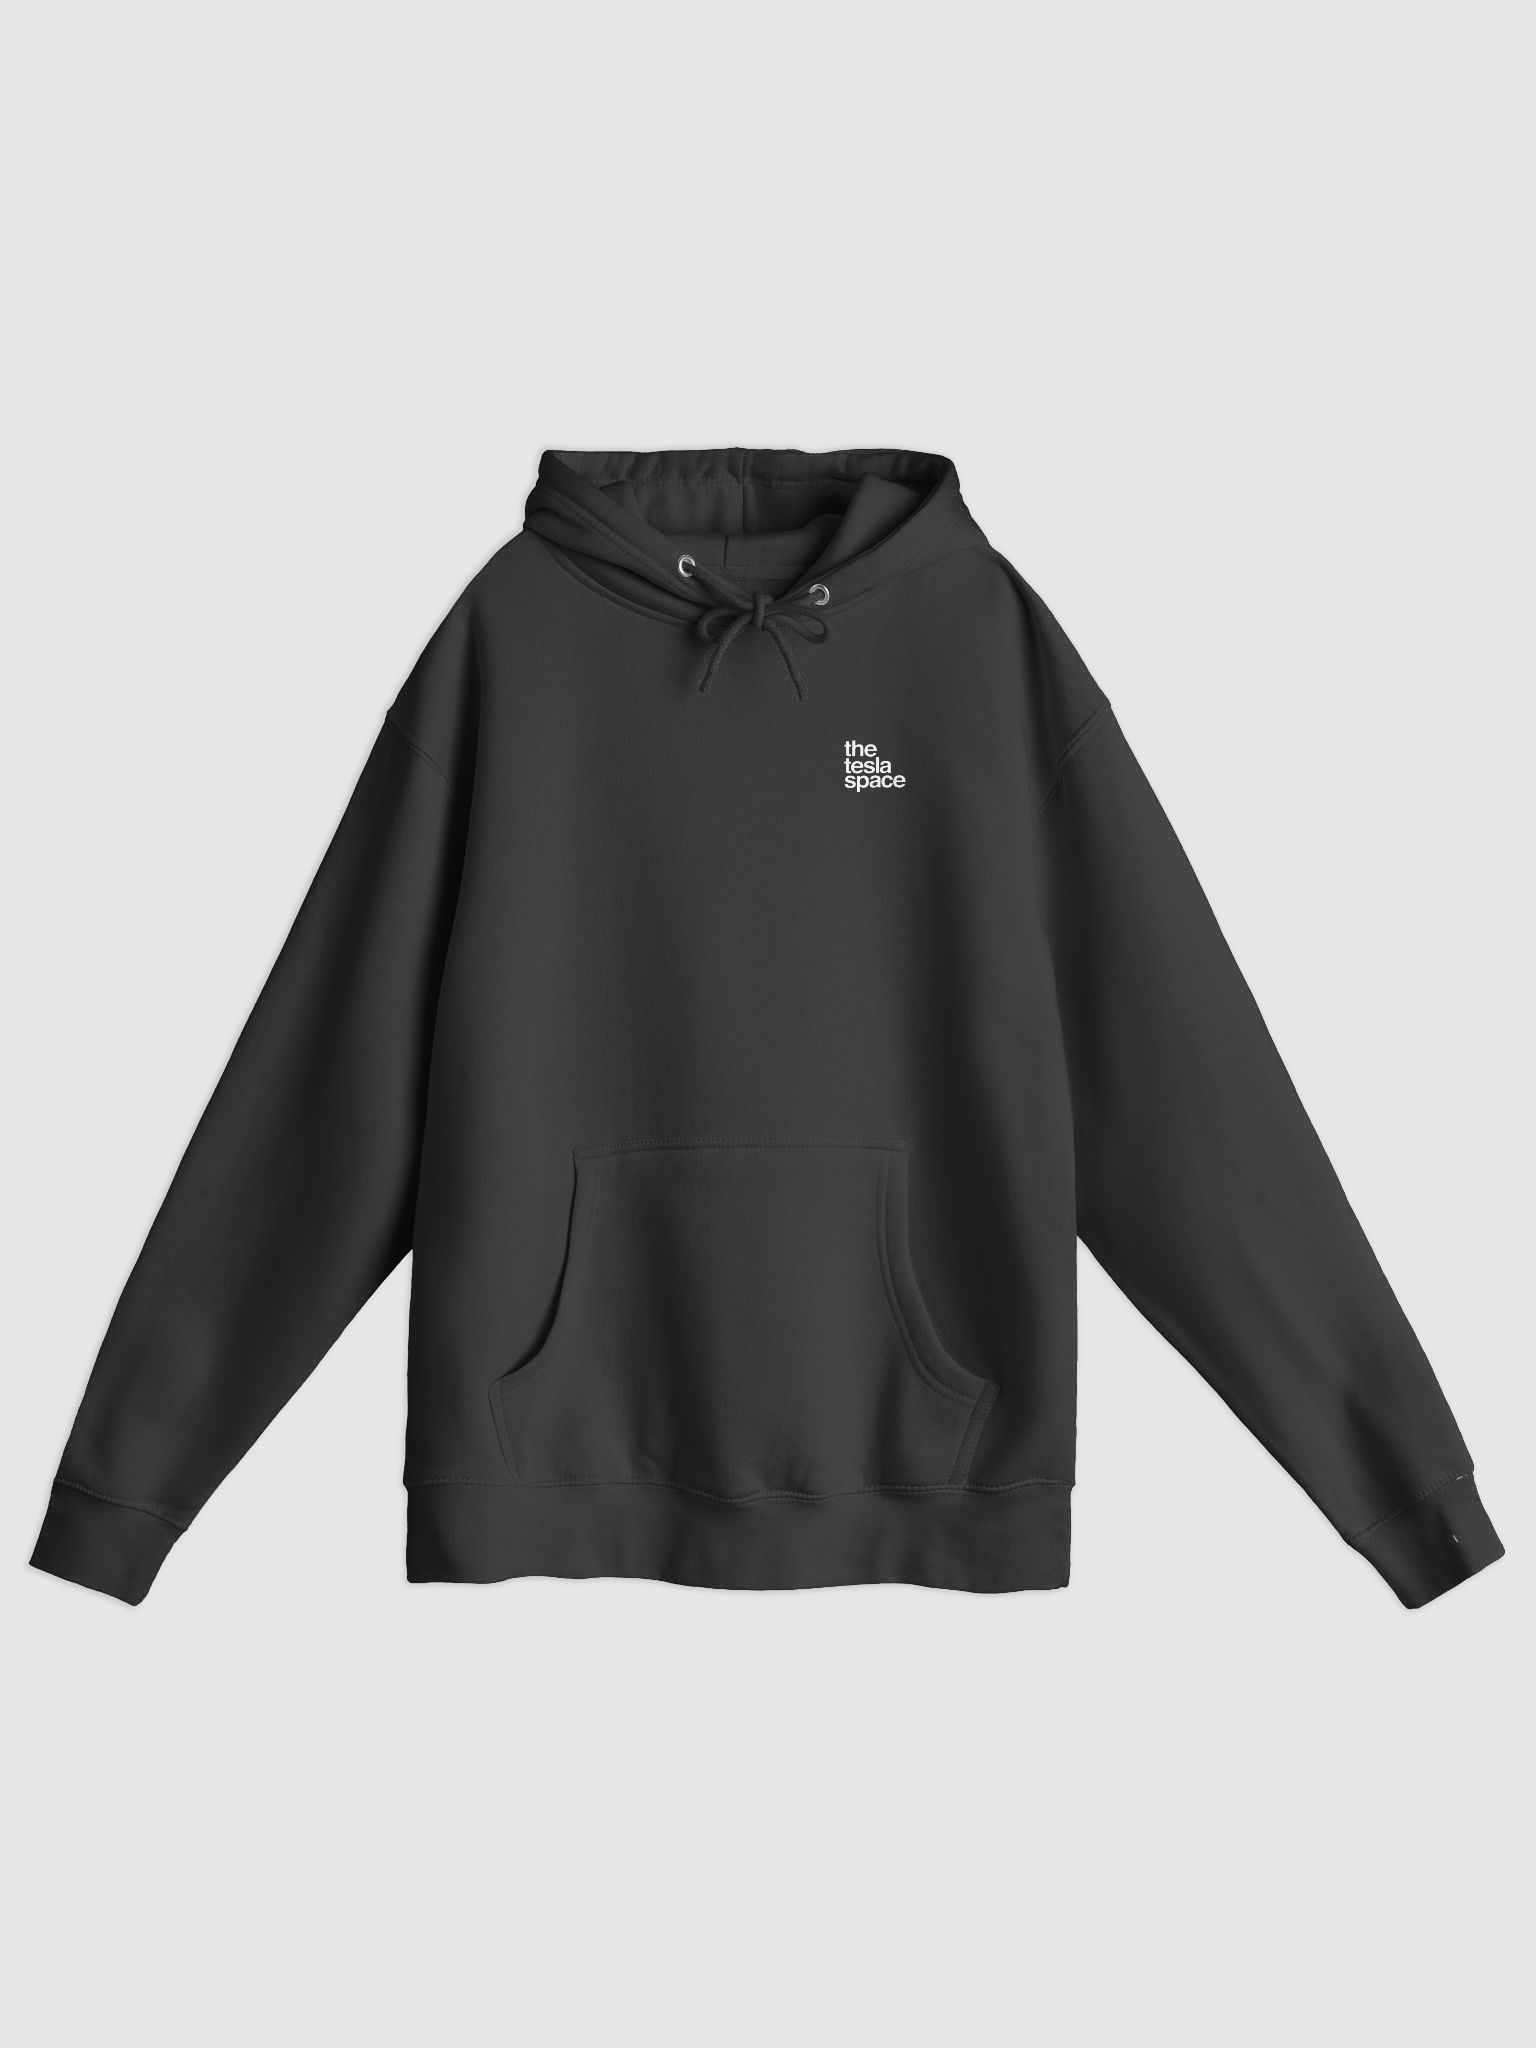 The Tesla Space Logo Hoodie | The Tesla Space / The Space Race